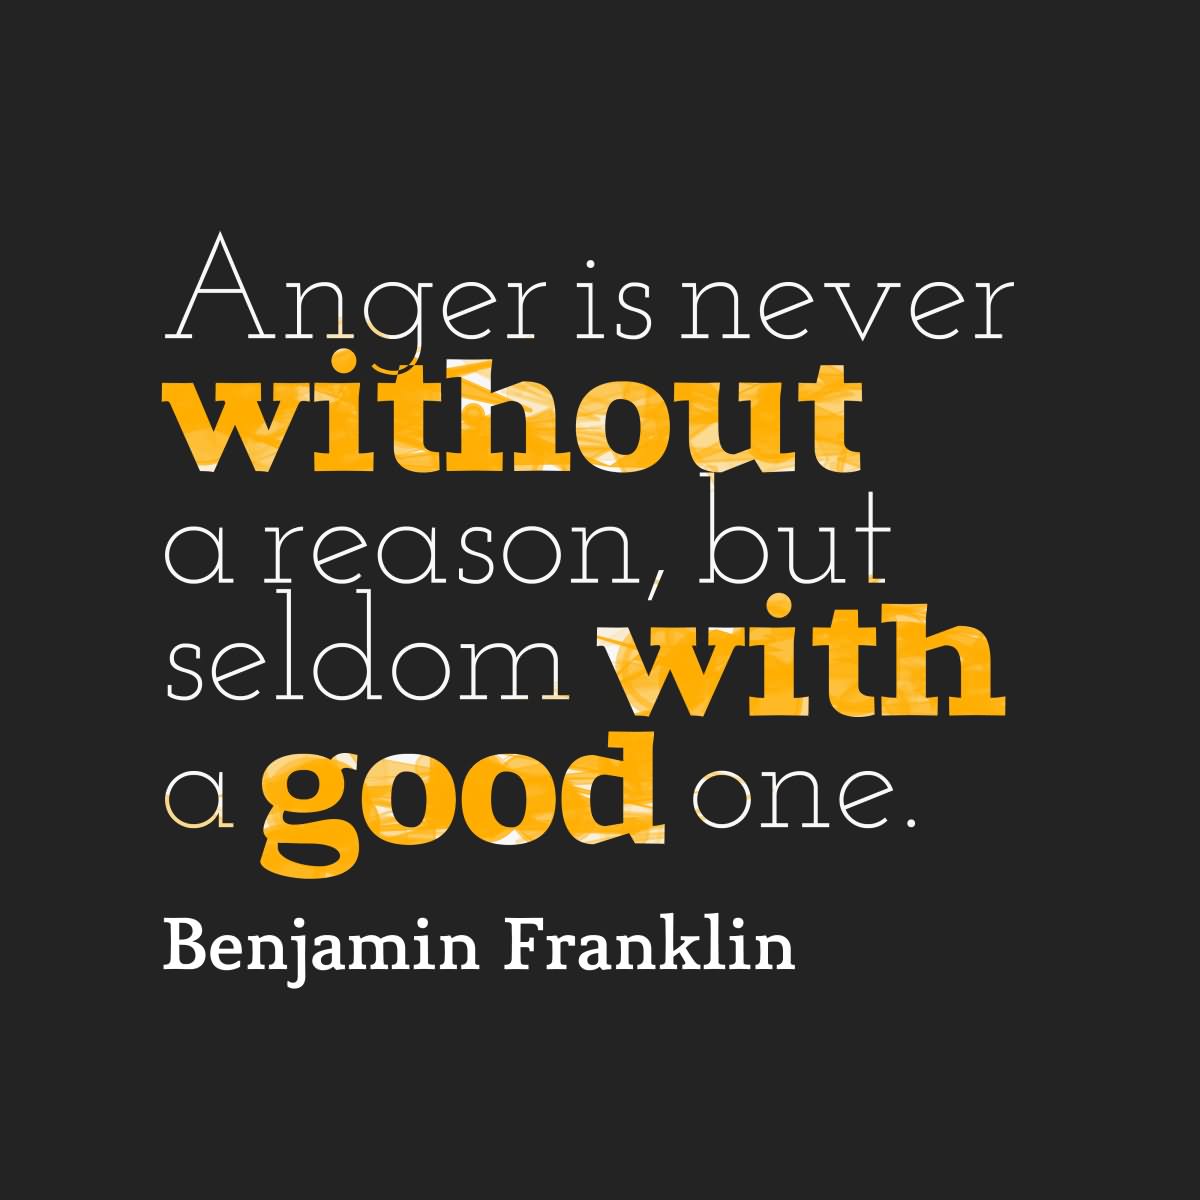 Anger is never without a Reason, but seldom with a good One.